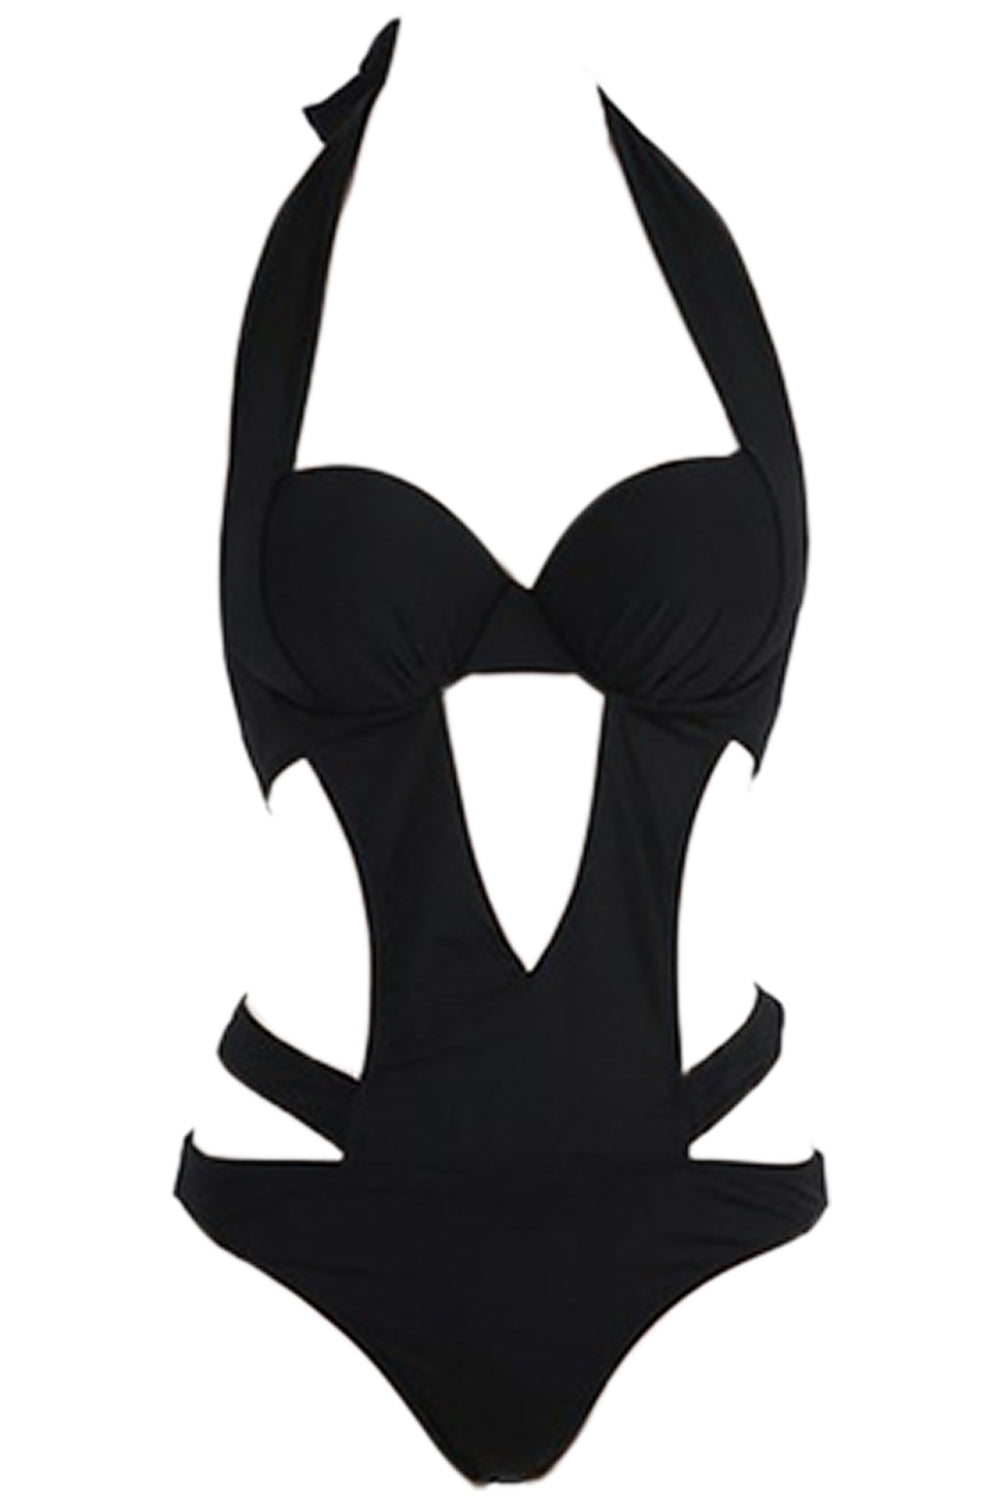 Iyasson Black Solid Color Halter Backless One-piece Swimsuit